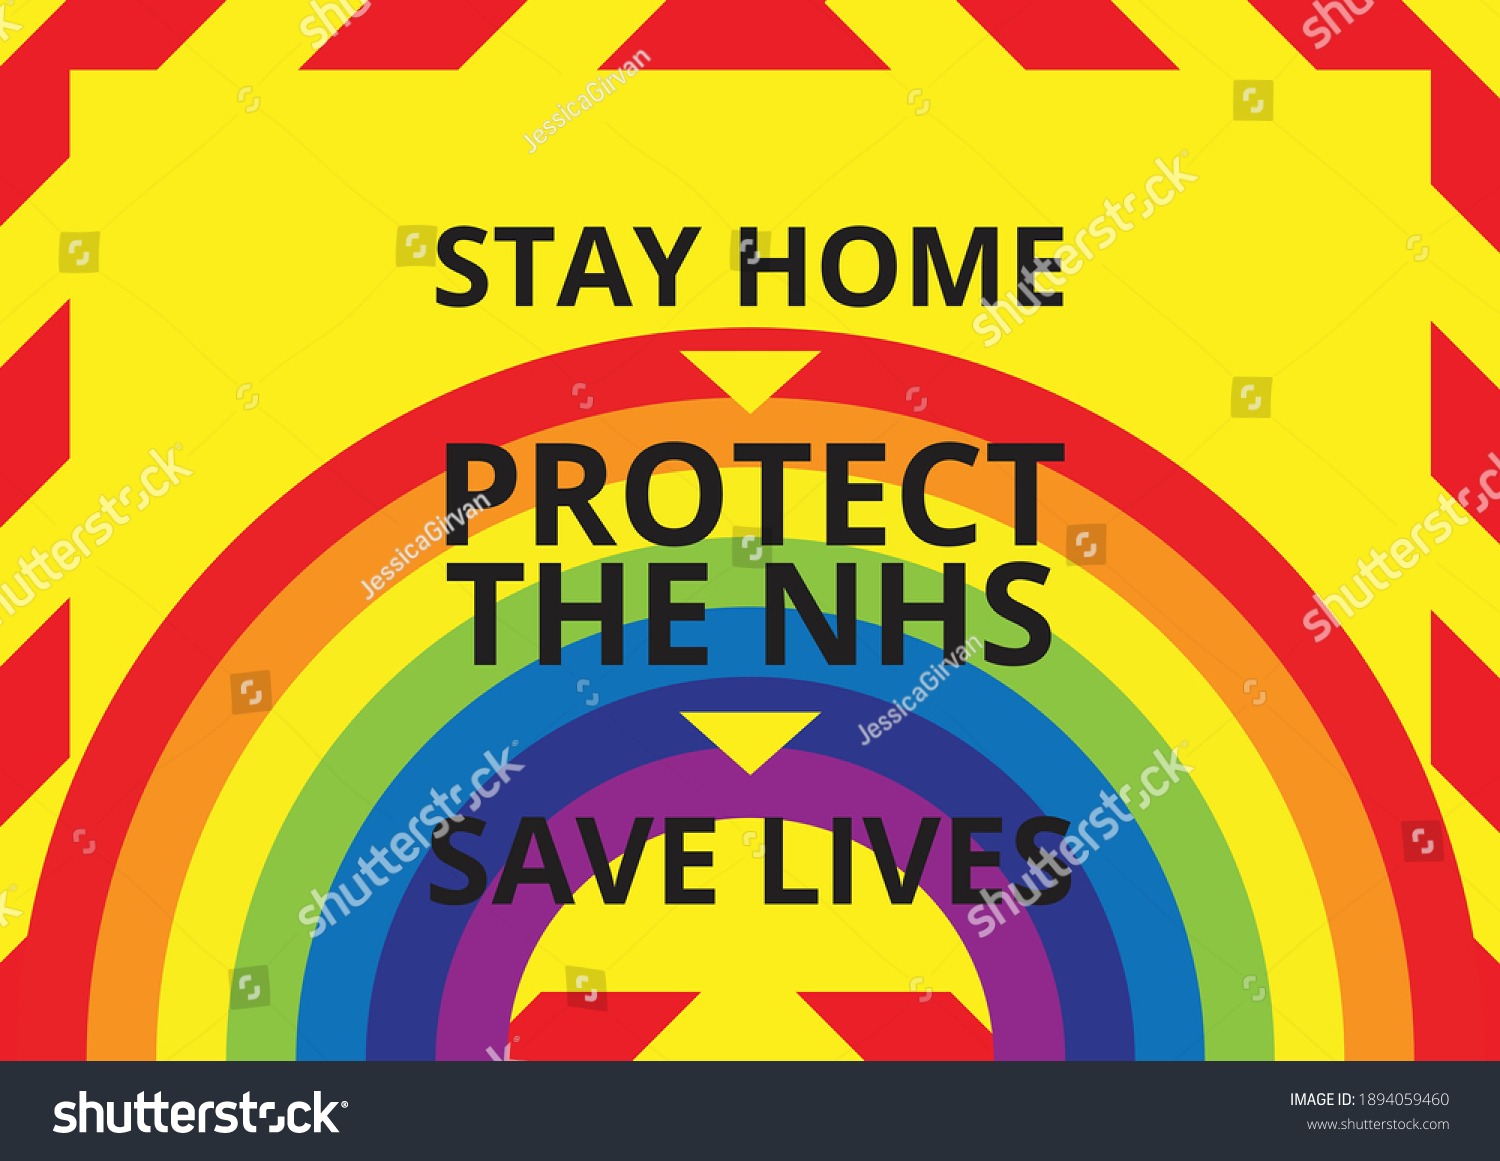 Stay Home Protect Nhs Save Lives Stock Vector Royalty Free 1894059460 Shutterstock